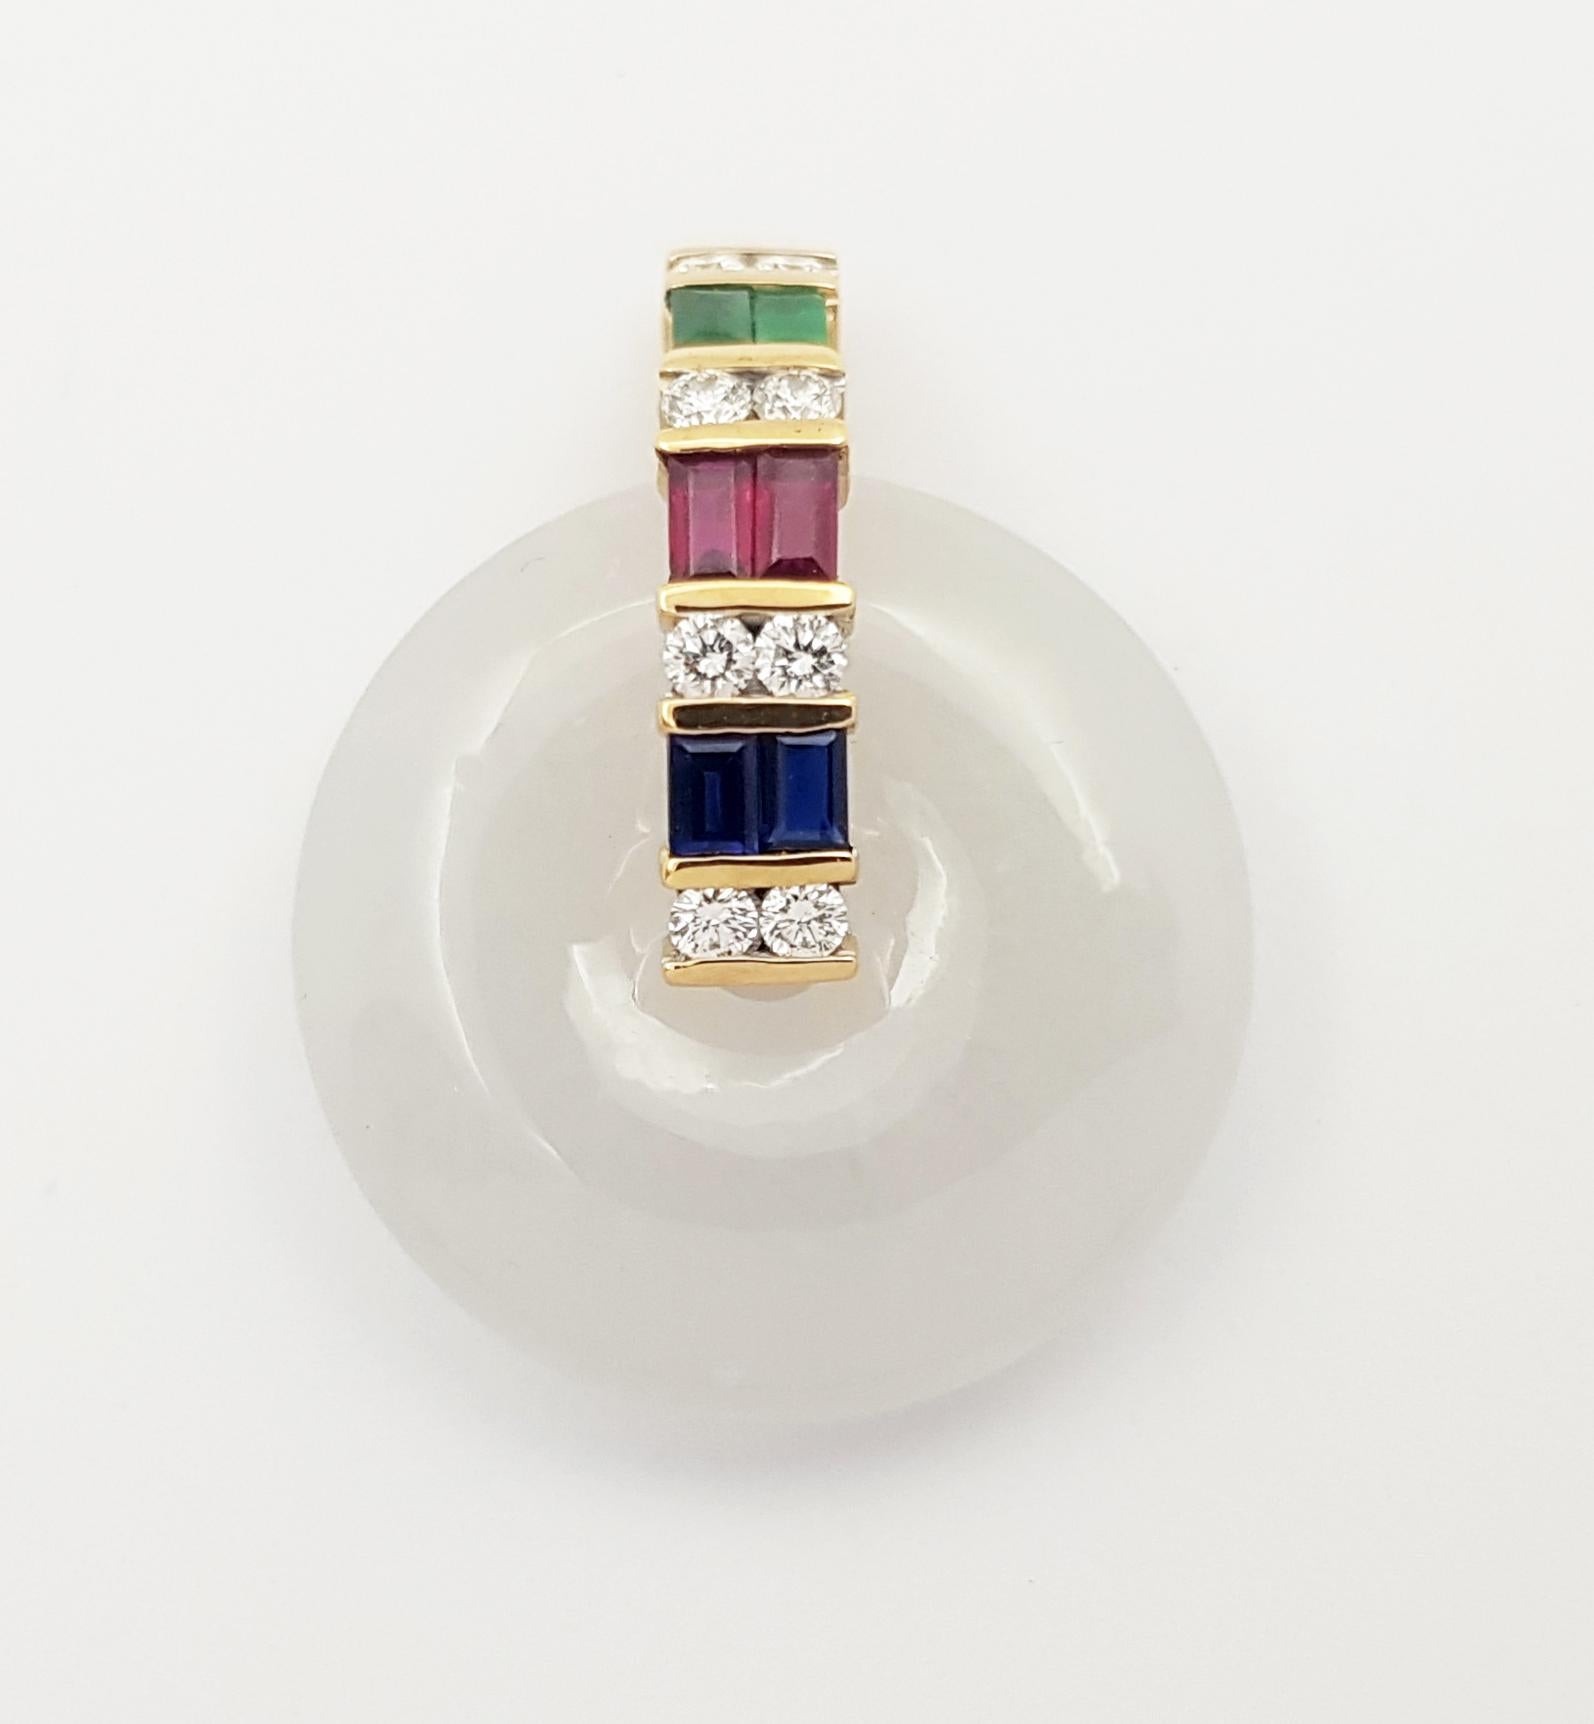 White Jade, Emerald 0.18 carat, Blue Sapphire 0.26 carat, Ruby 0.35 carat and Diamond 0.29 carat Pendant set in 18K Gold Settings
(chain not included)

Width: 2.3 cm 
Length: 3.0  cm
Total Weight: 8.8 grams

